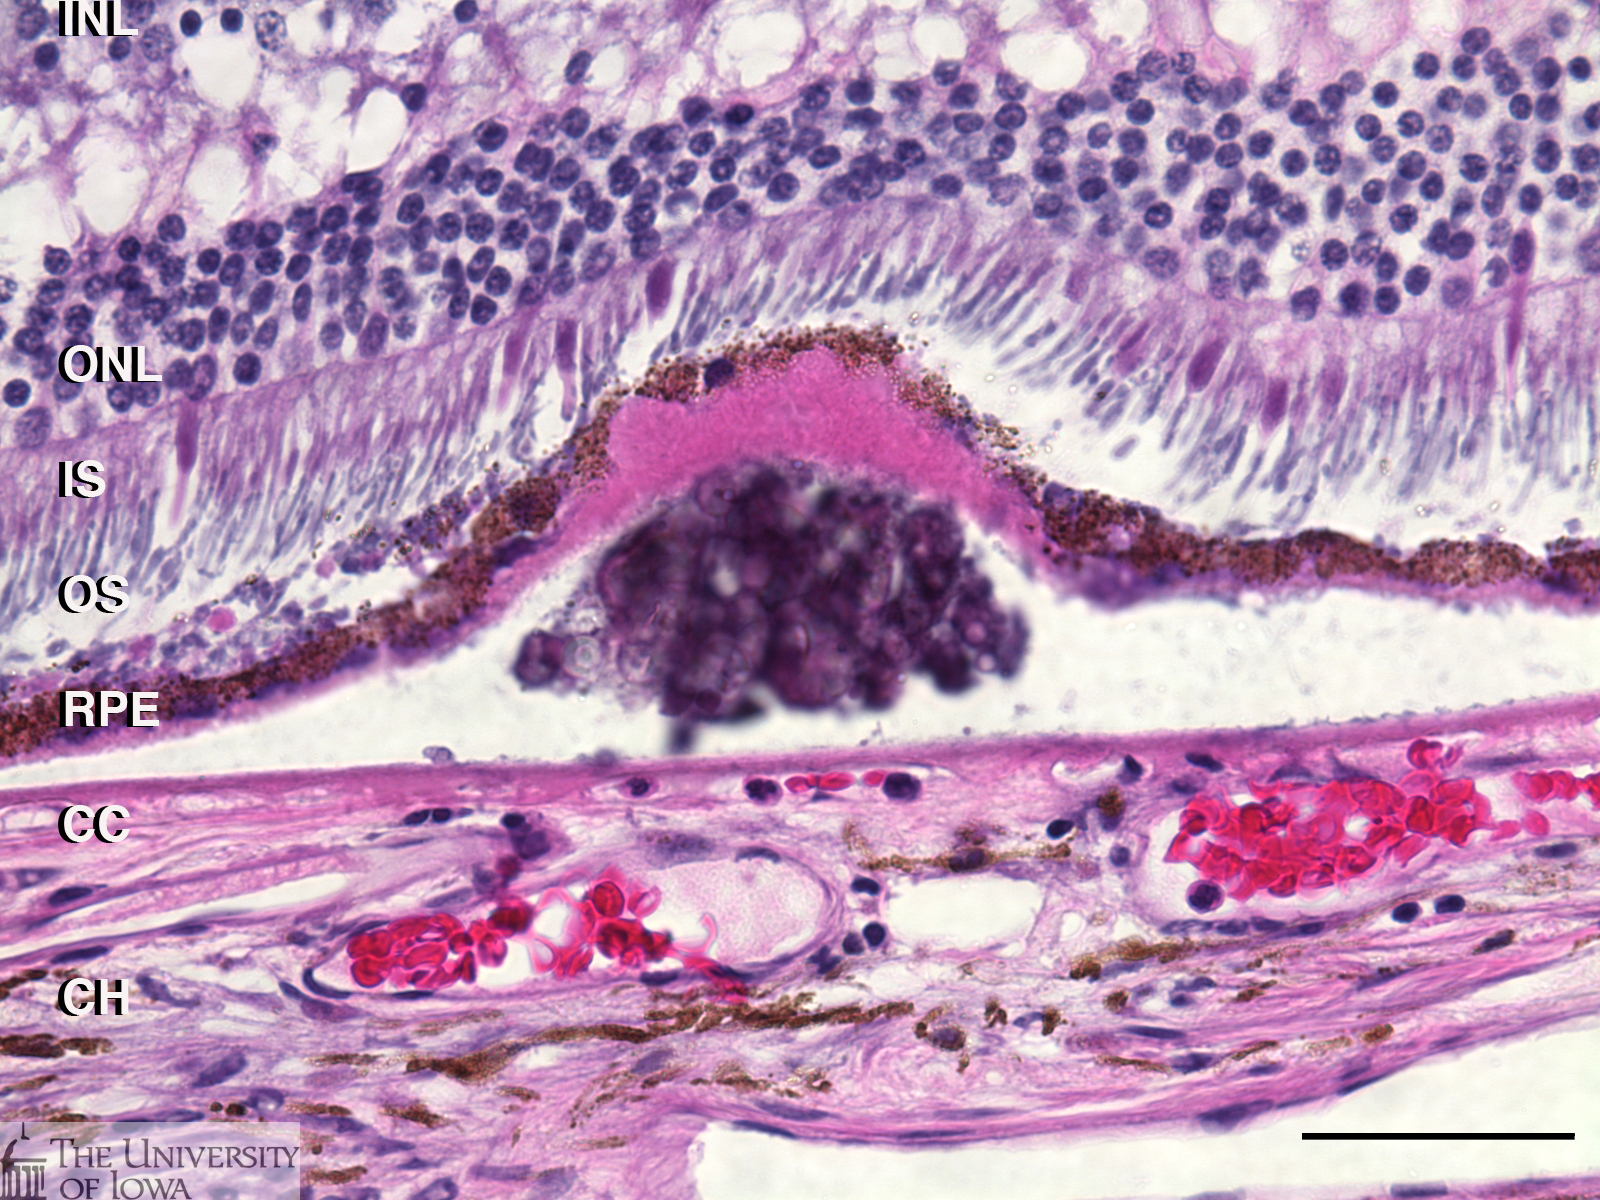 H&E stain shows sub-RPE deposition